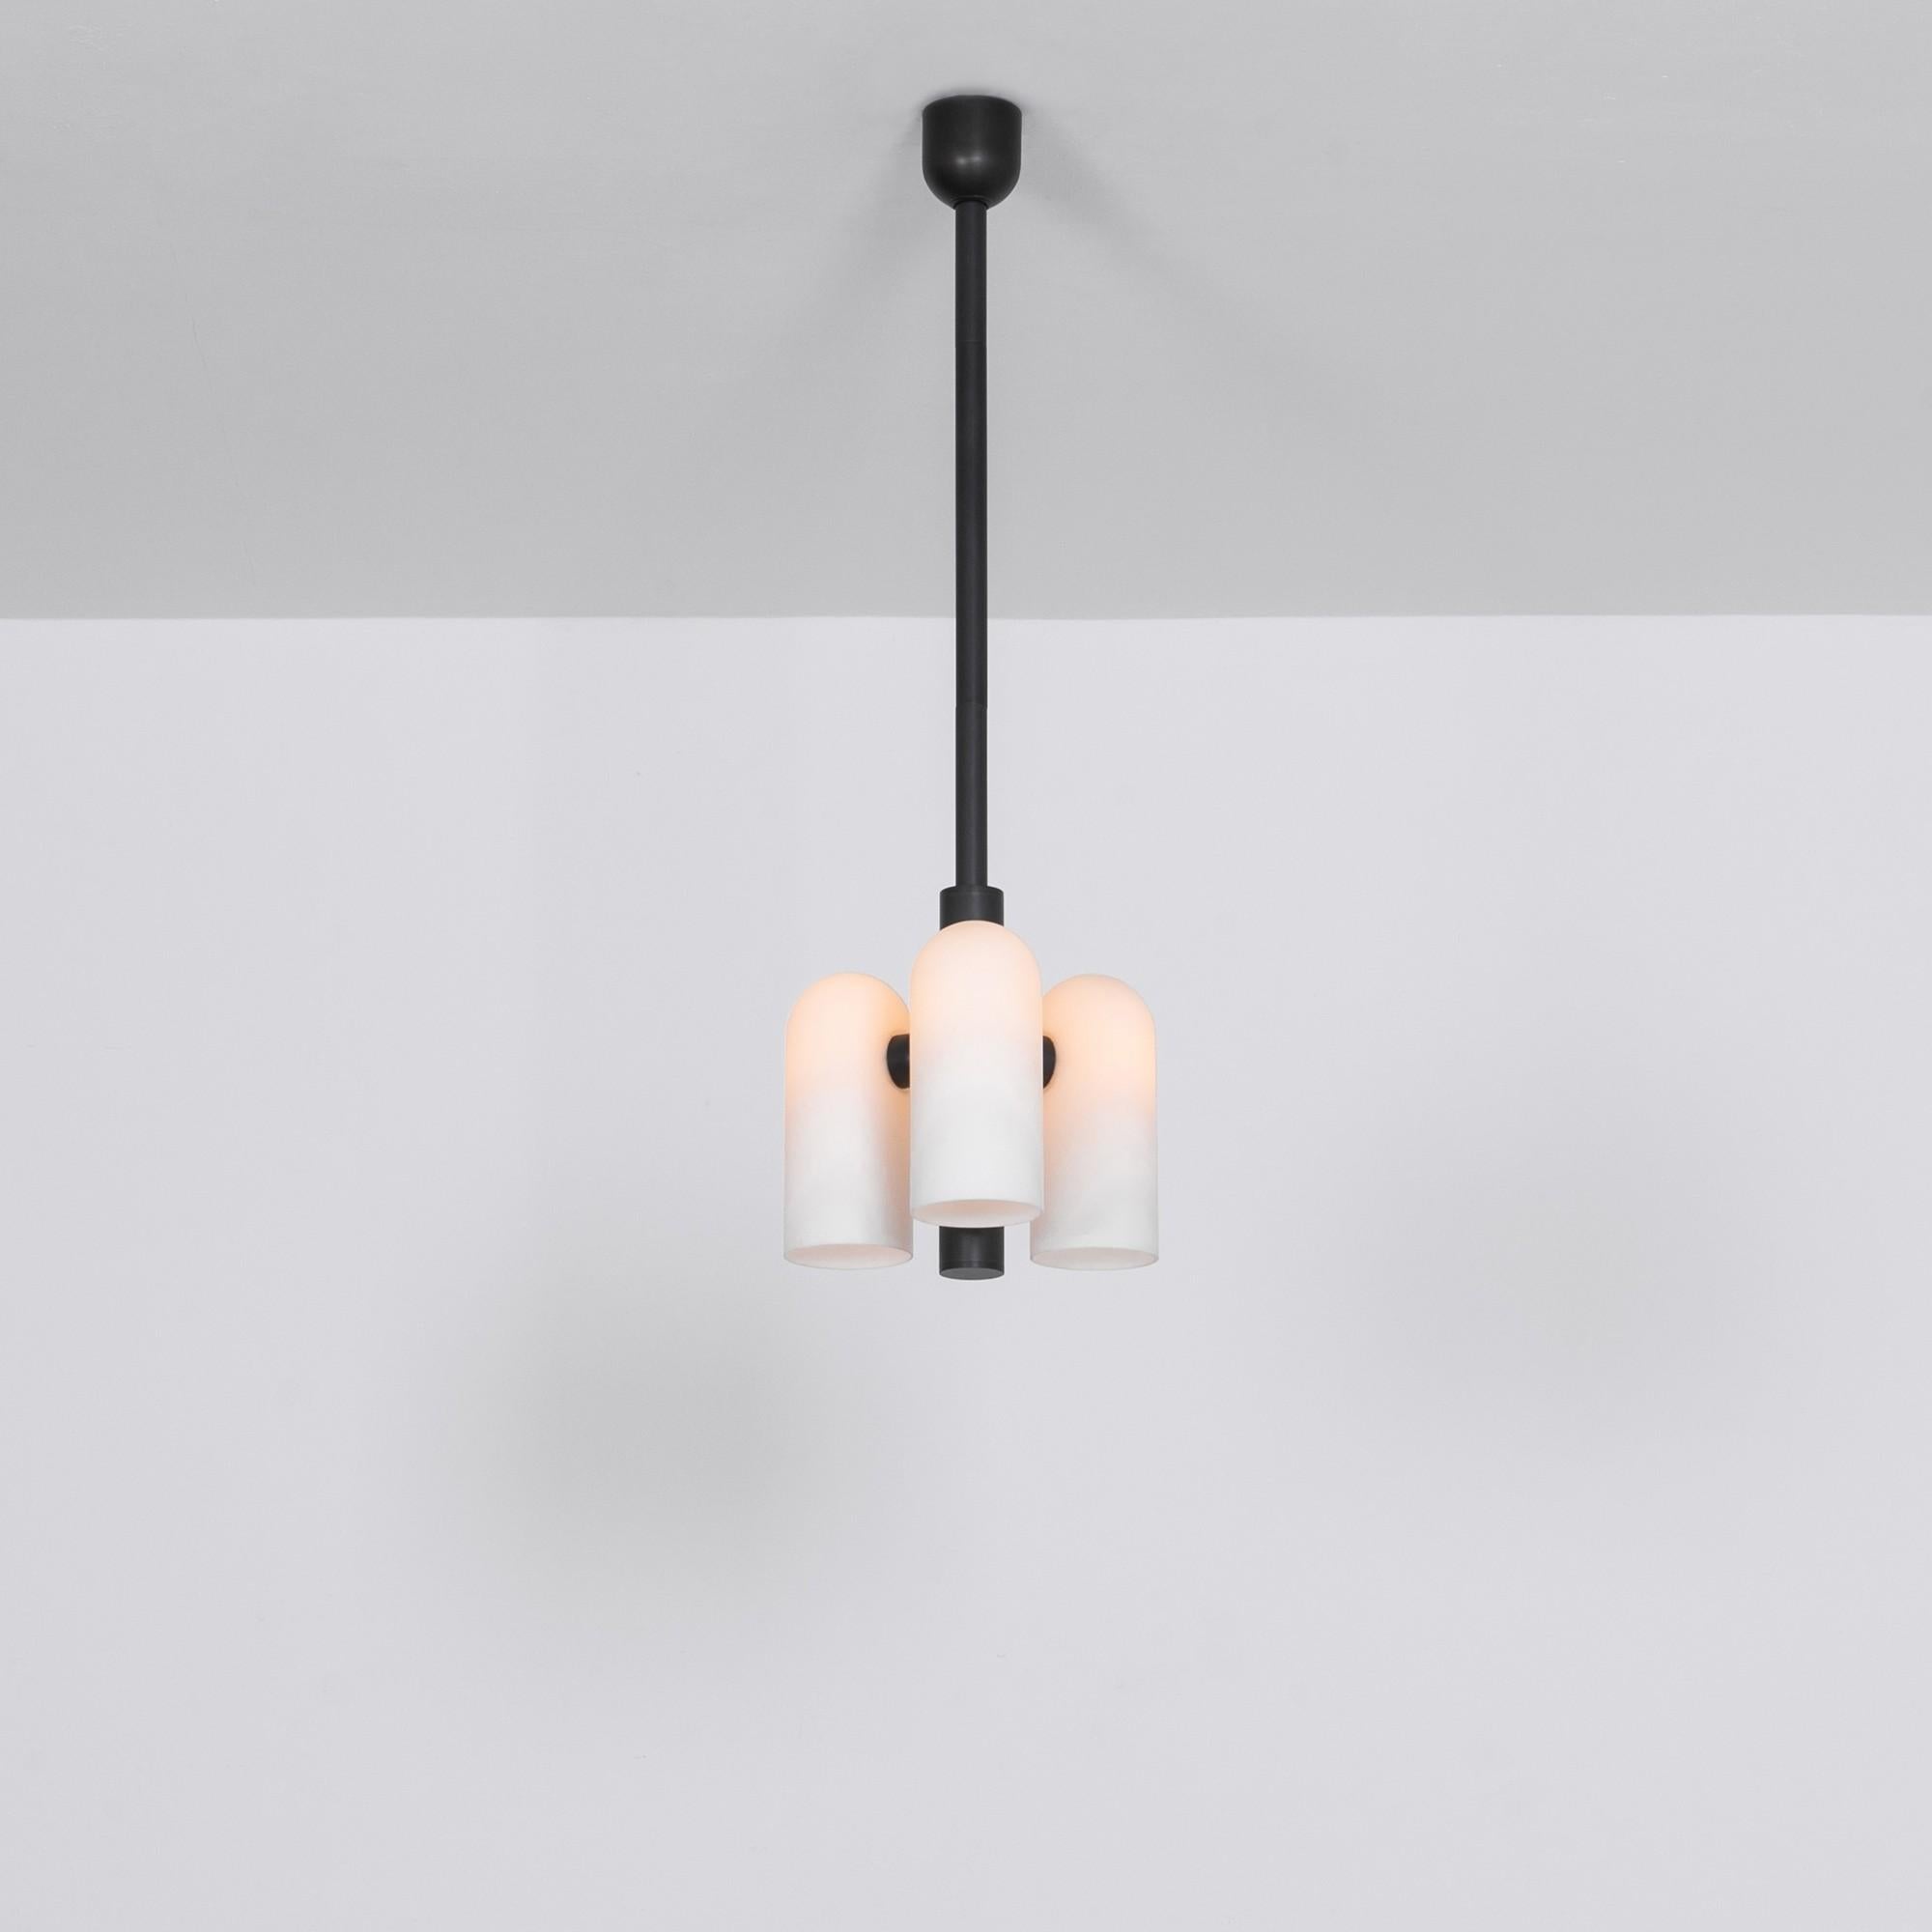 Odyssey 3 Black Pendant Light by Schwung
Dimensions: W 28.6 x D 28.6 x H 137 cm
Materials: Black gunmetal, frosted glass

Finishes available: Black gunmetal, polished nickel


 Schwung is a german word, and loosely defined, means energy or momentumm